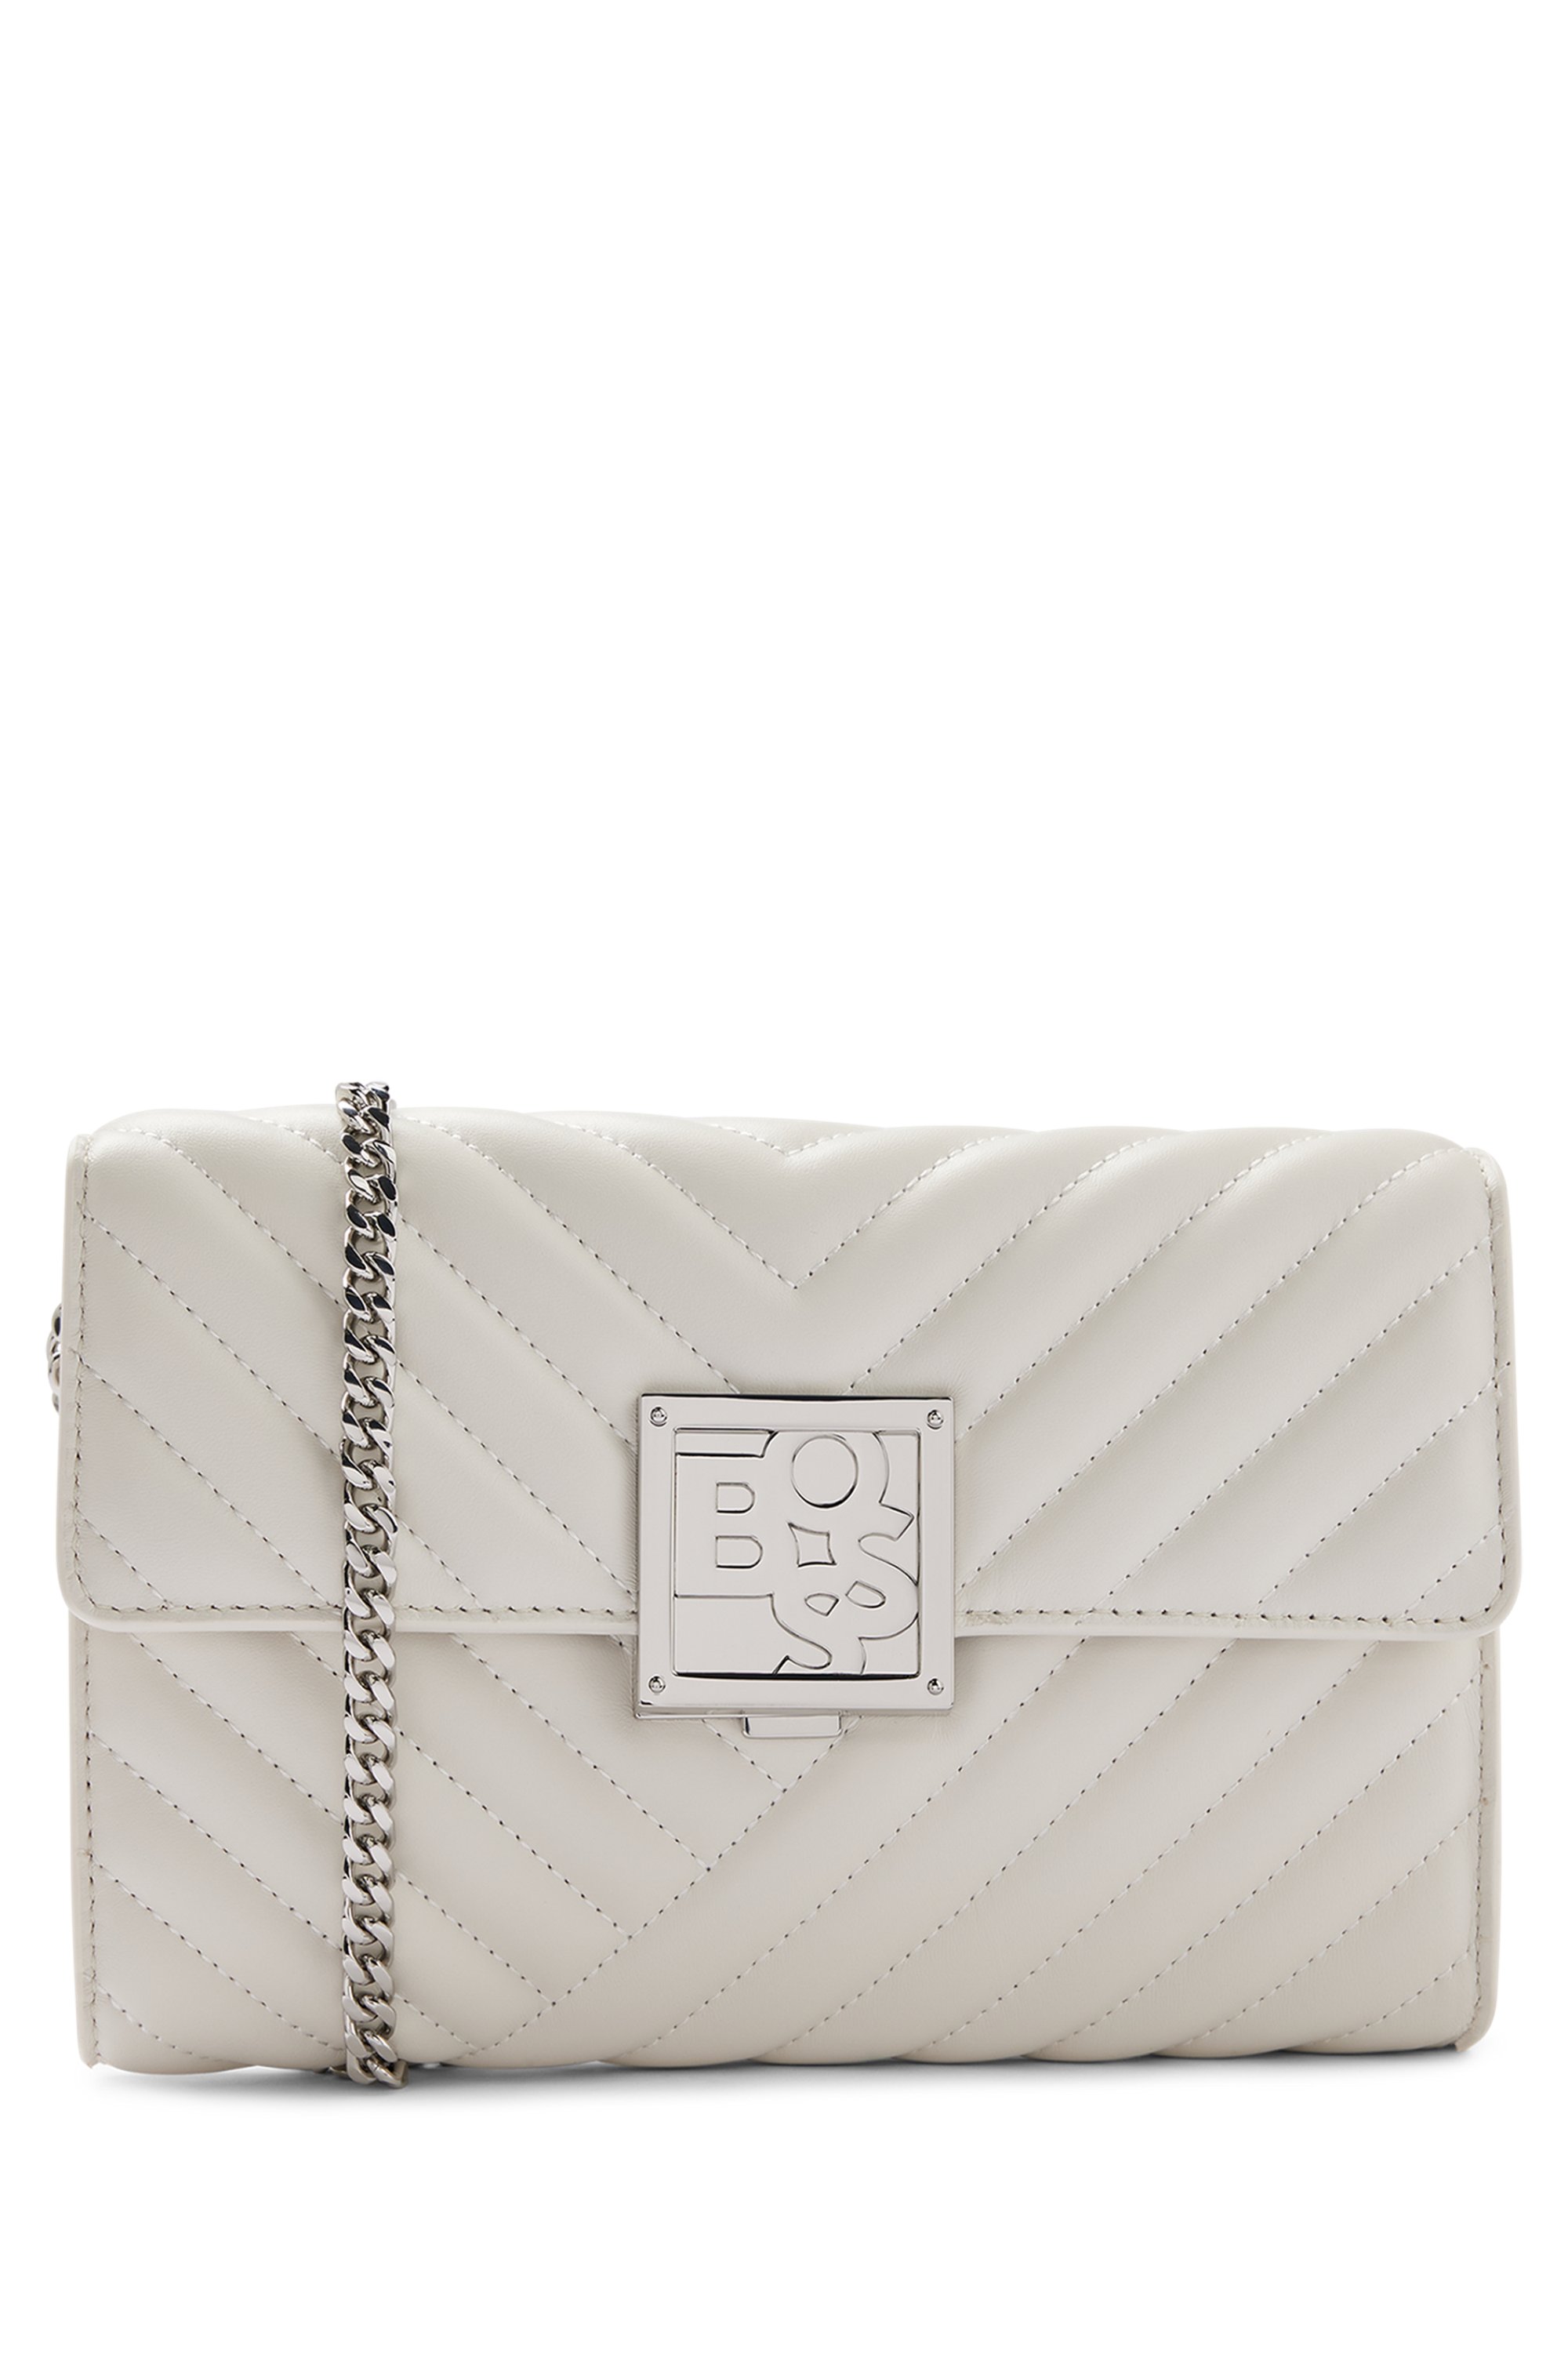 Quilted-leather crossbody bag with logo closure, Light Beige